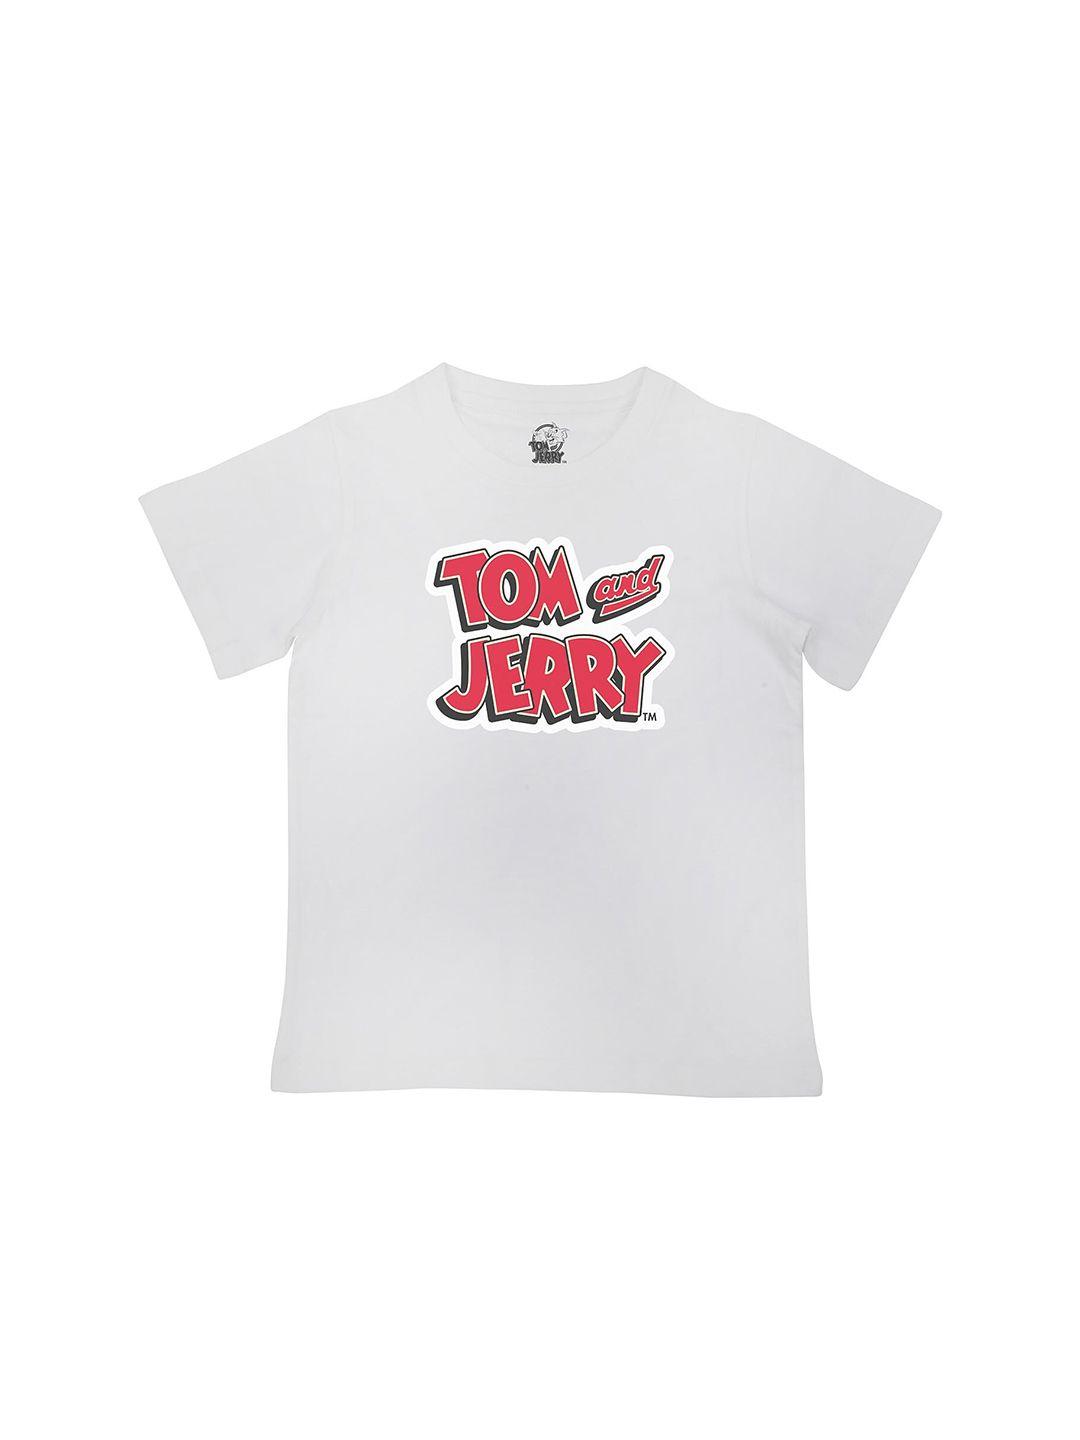 tom & jerry boys white graphic printed cotton t-shirt